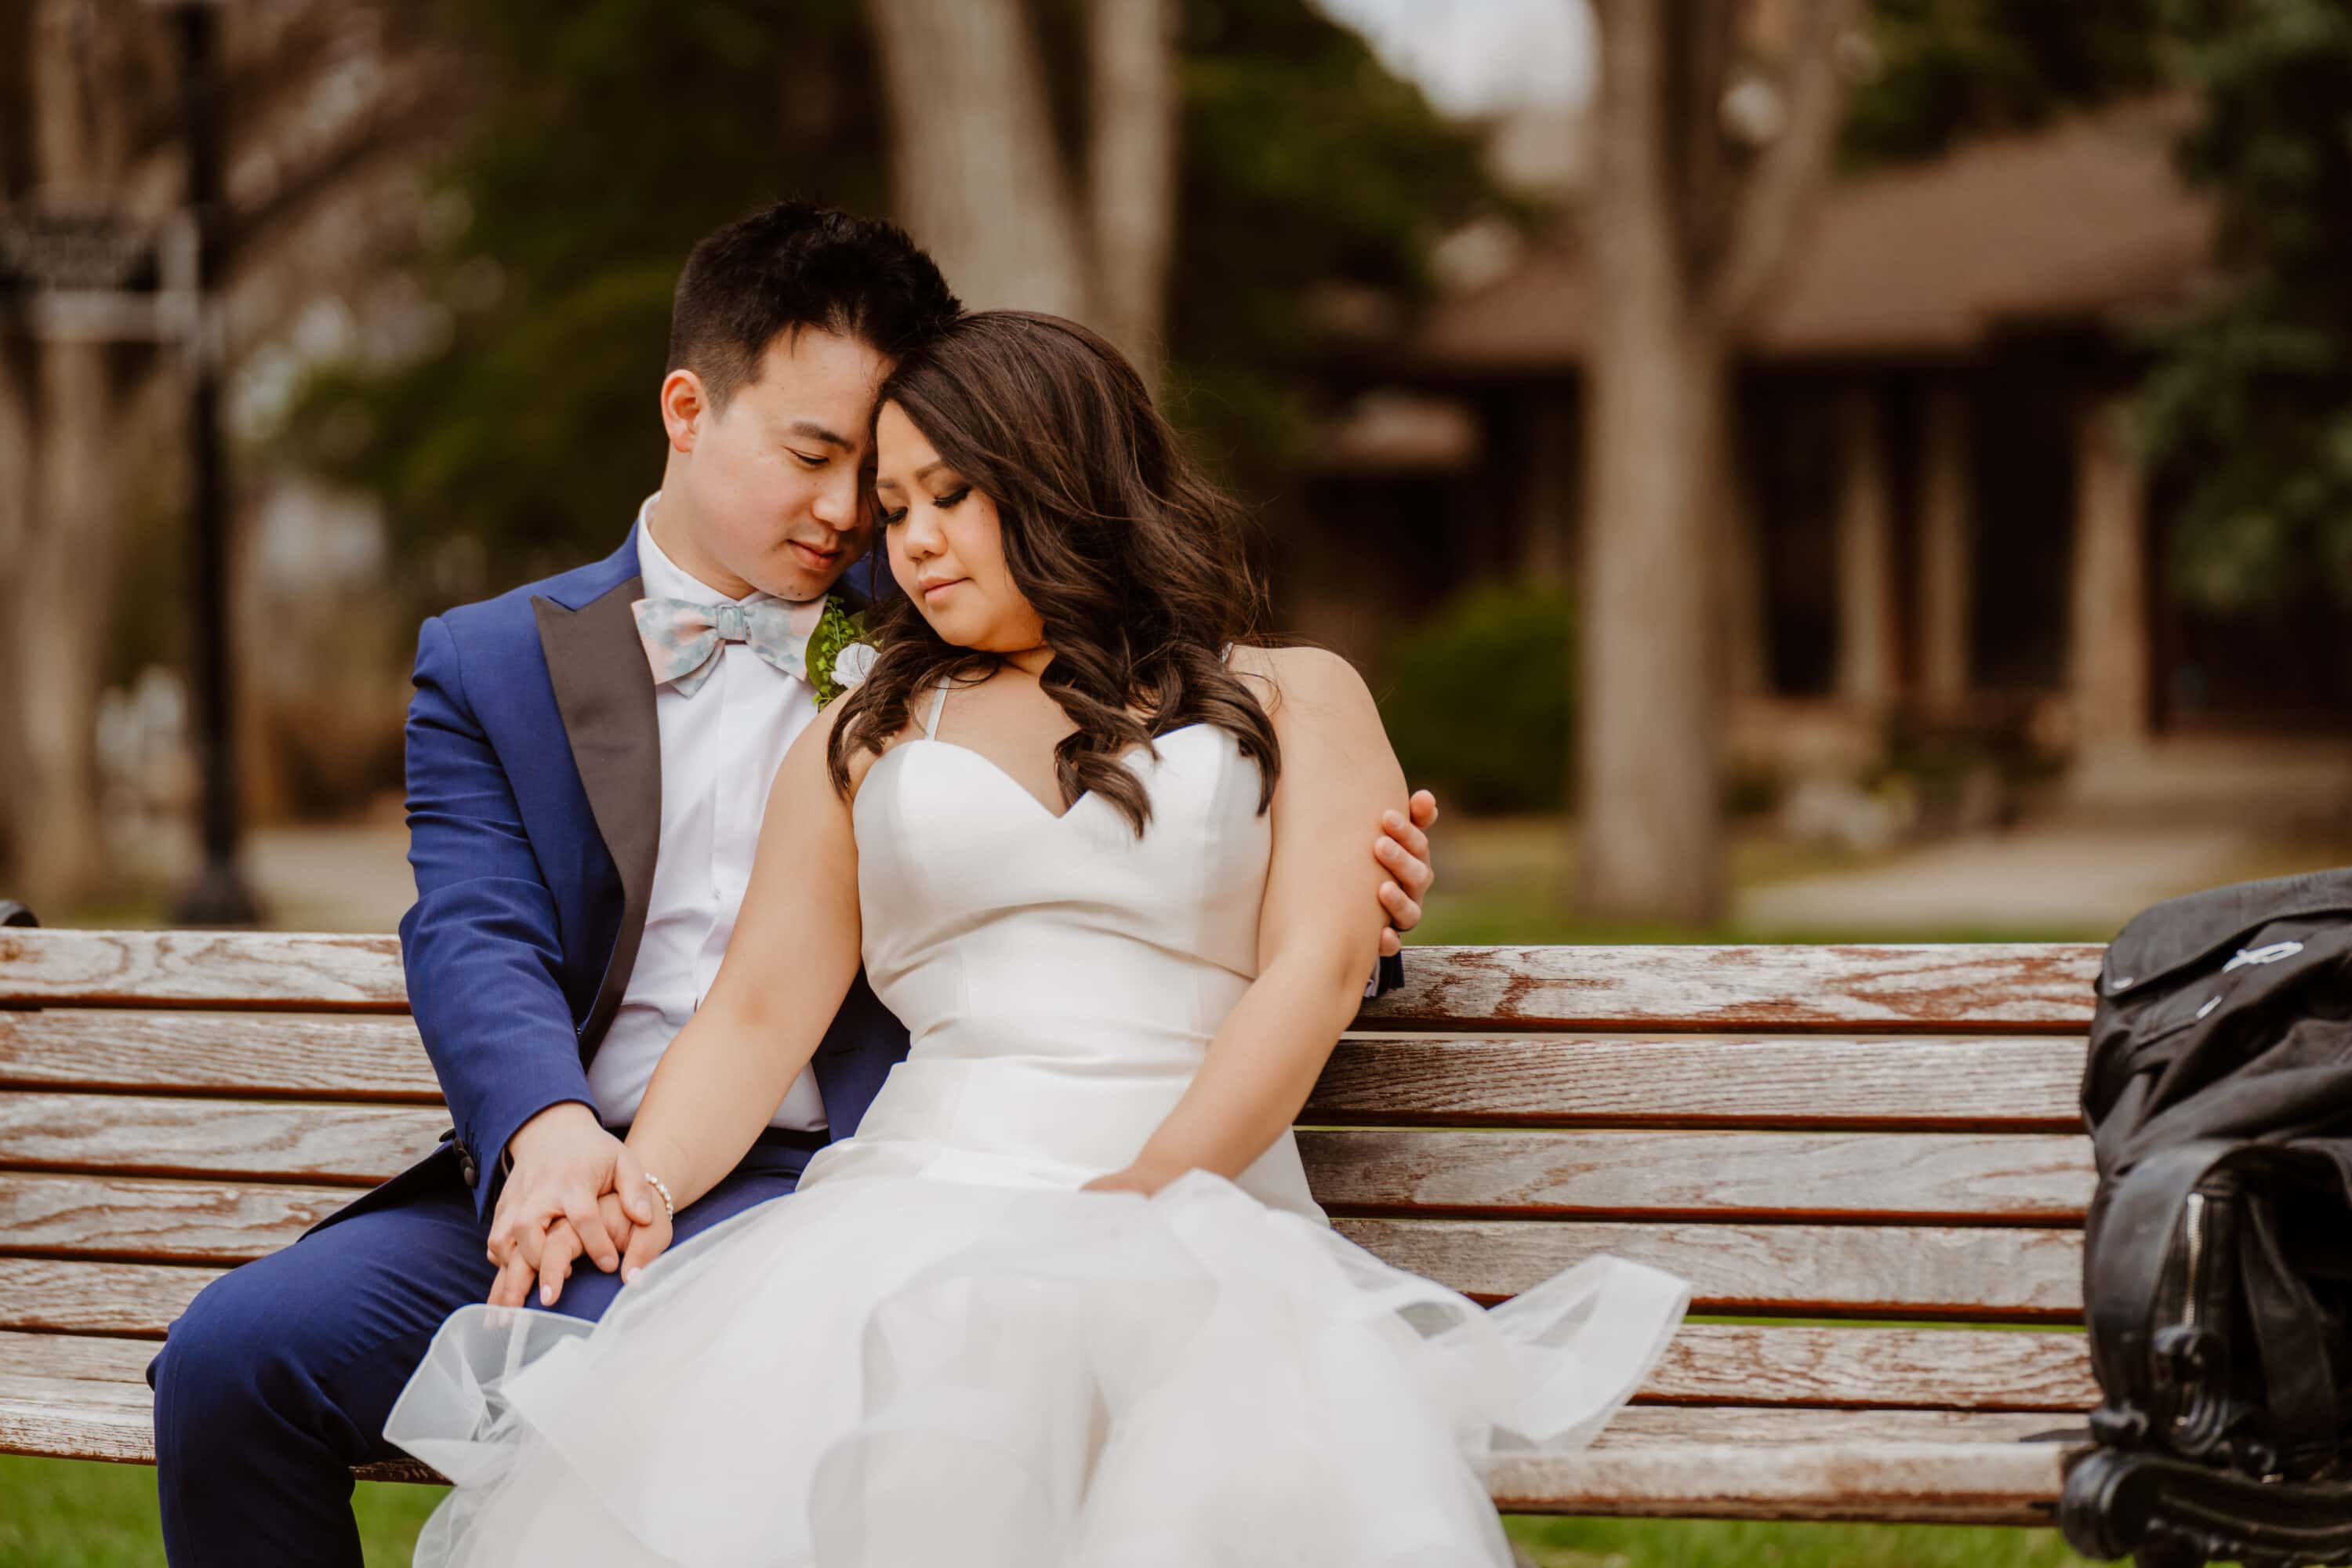 A bride and groom sitting on a bench outdoors and looking into each other's eyes